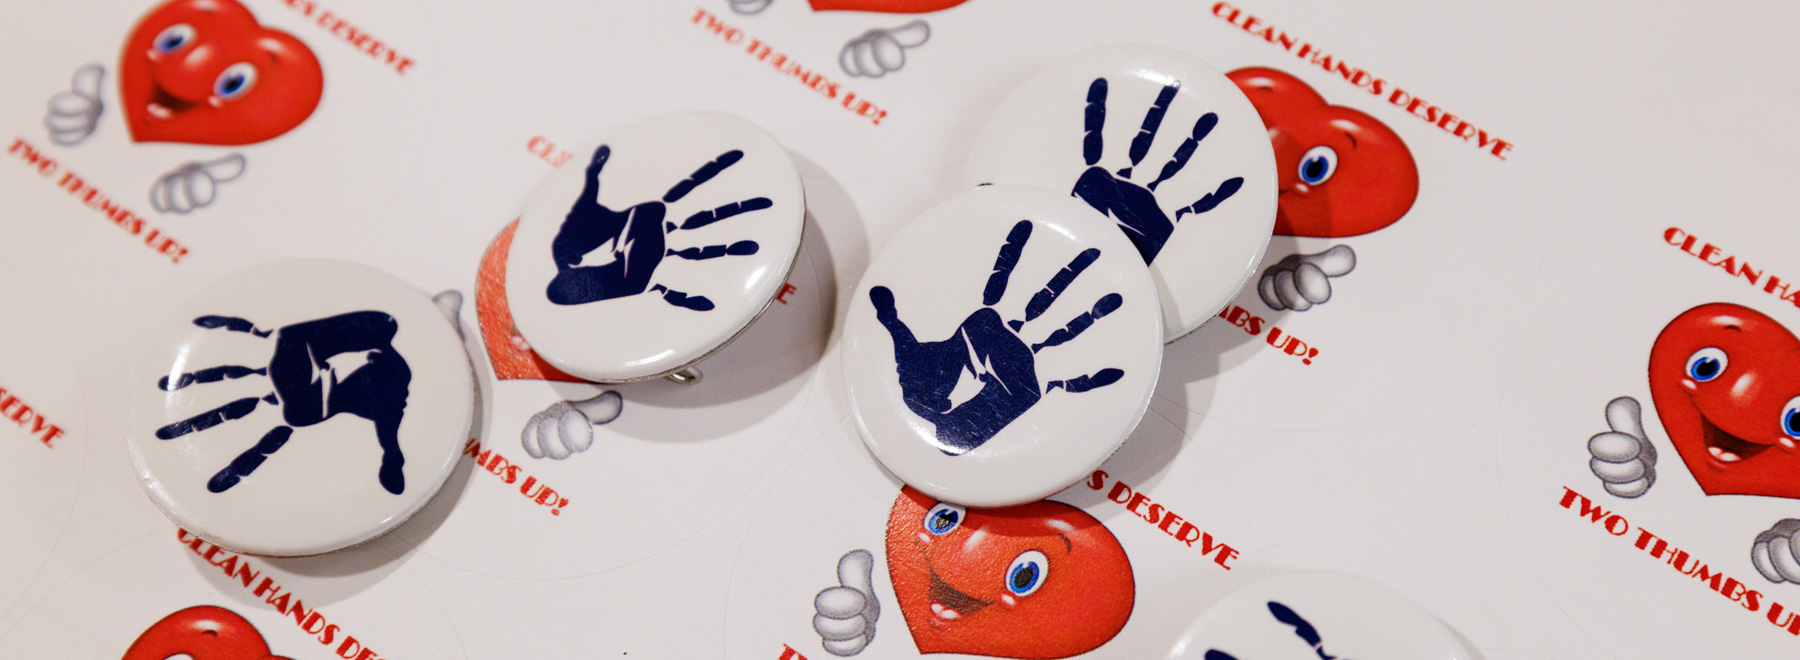 Pins and stickers remind everyone of hand hygiene's importance.